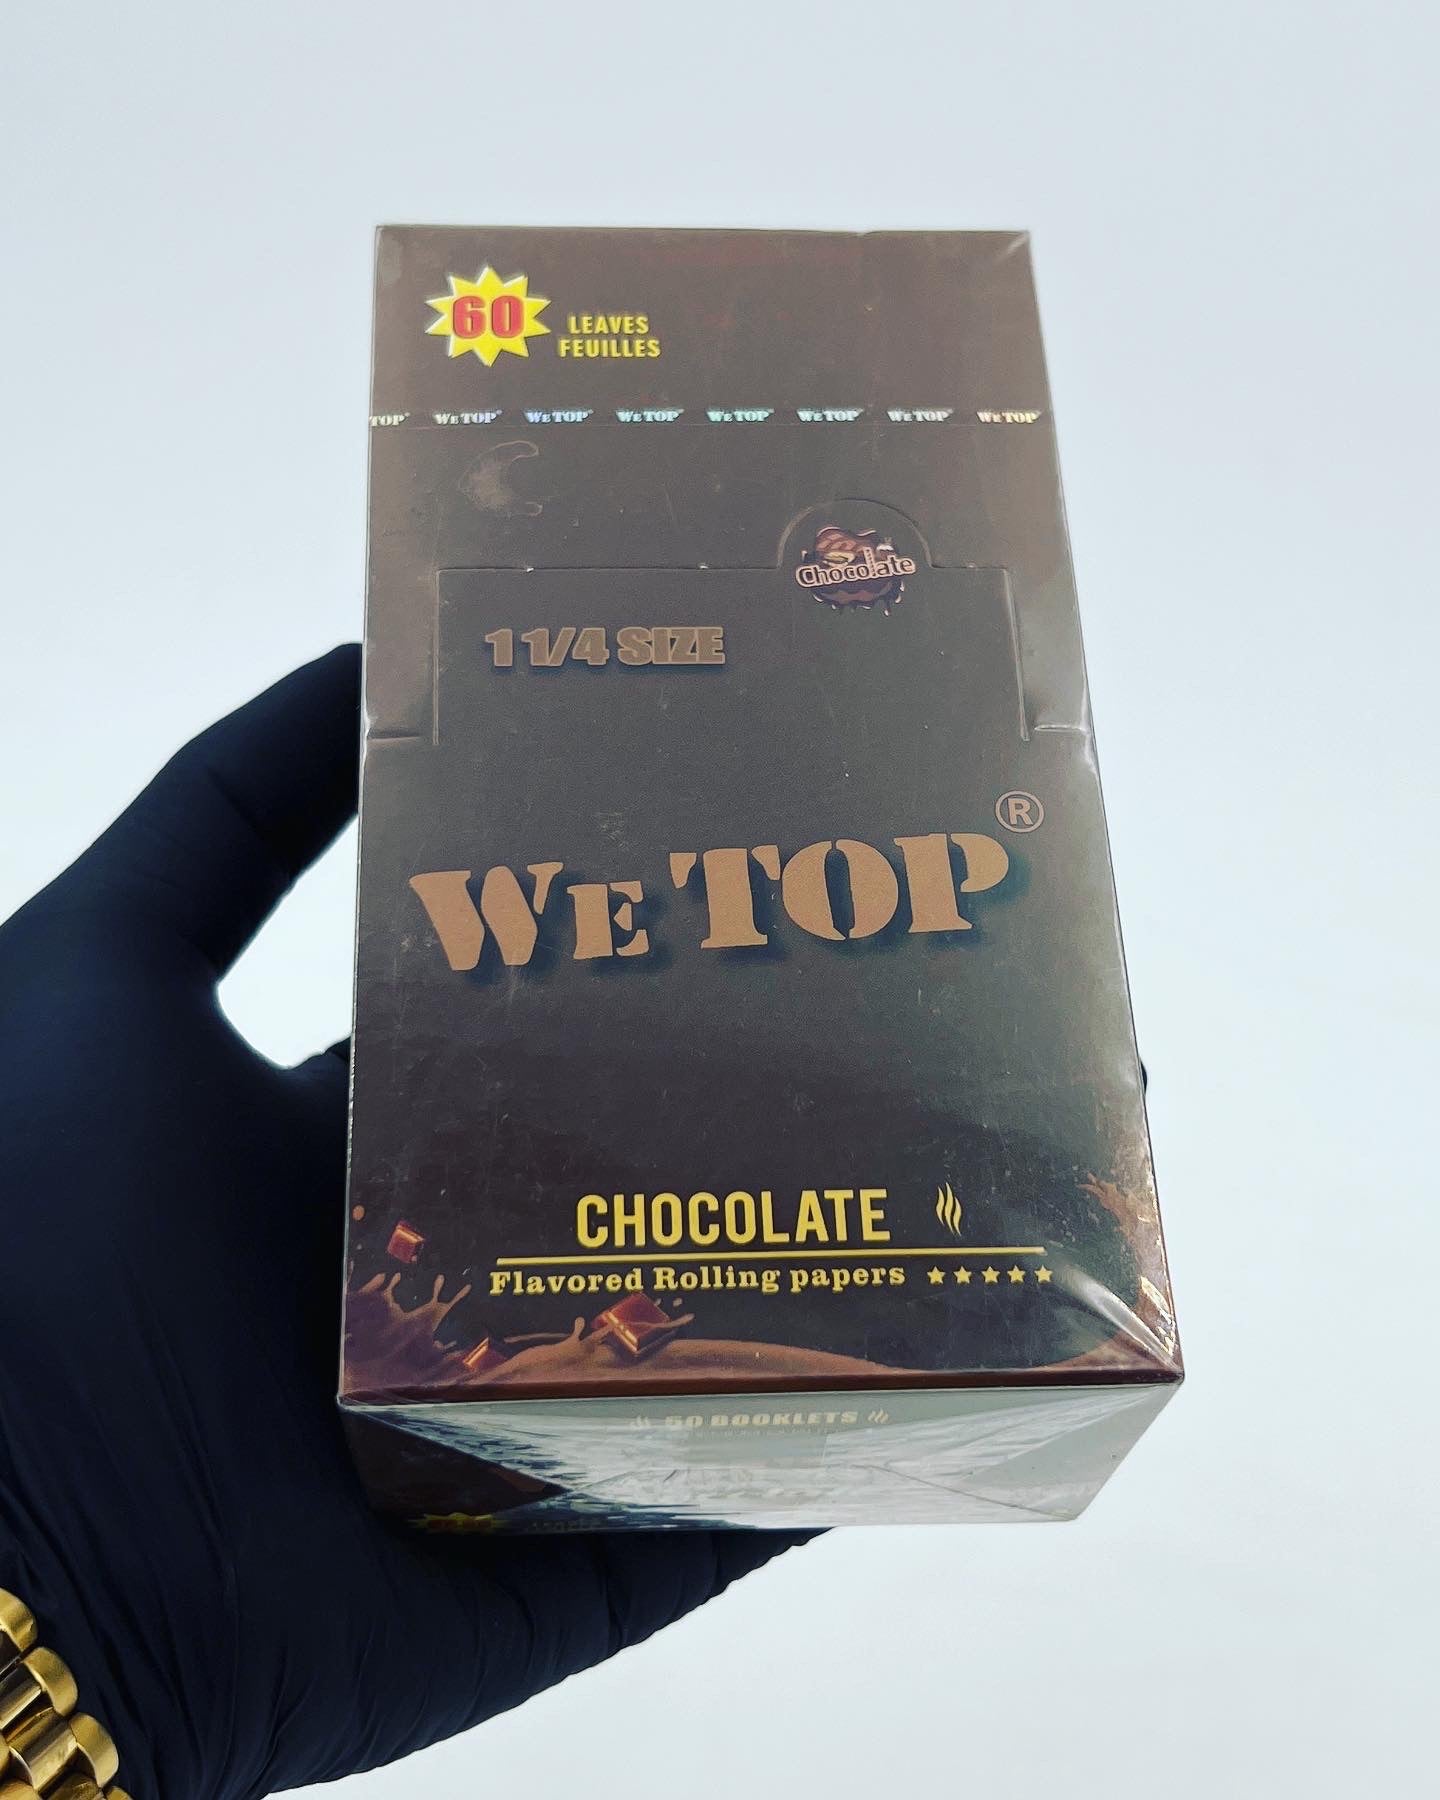 Wetop Chocolate Flavoured Rolling Papers 60 Leaves! (Full Box) - Bittchaser Smoke Shop